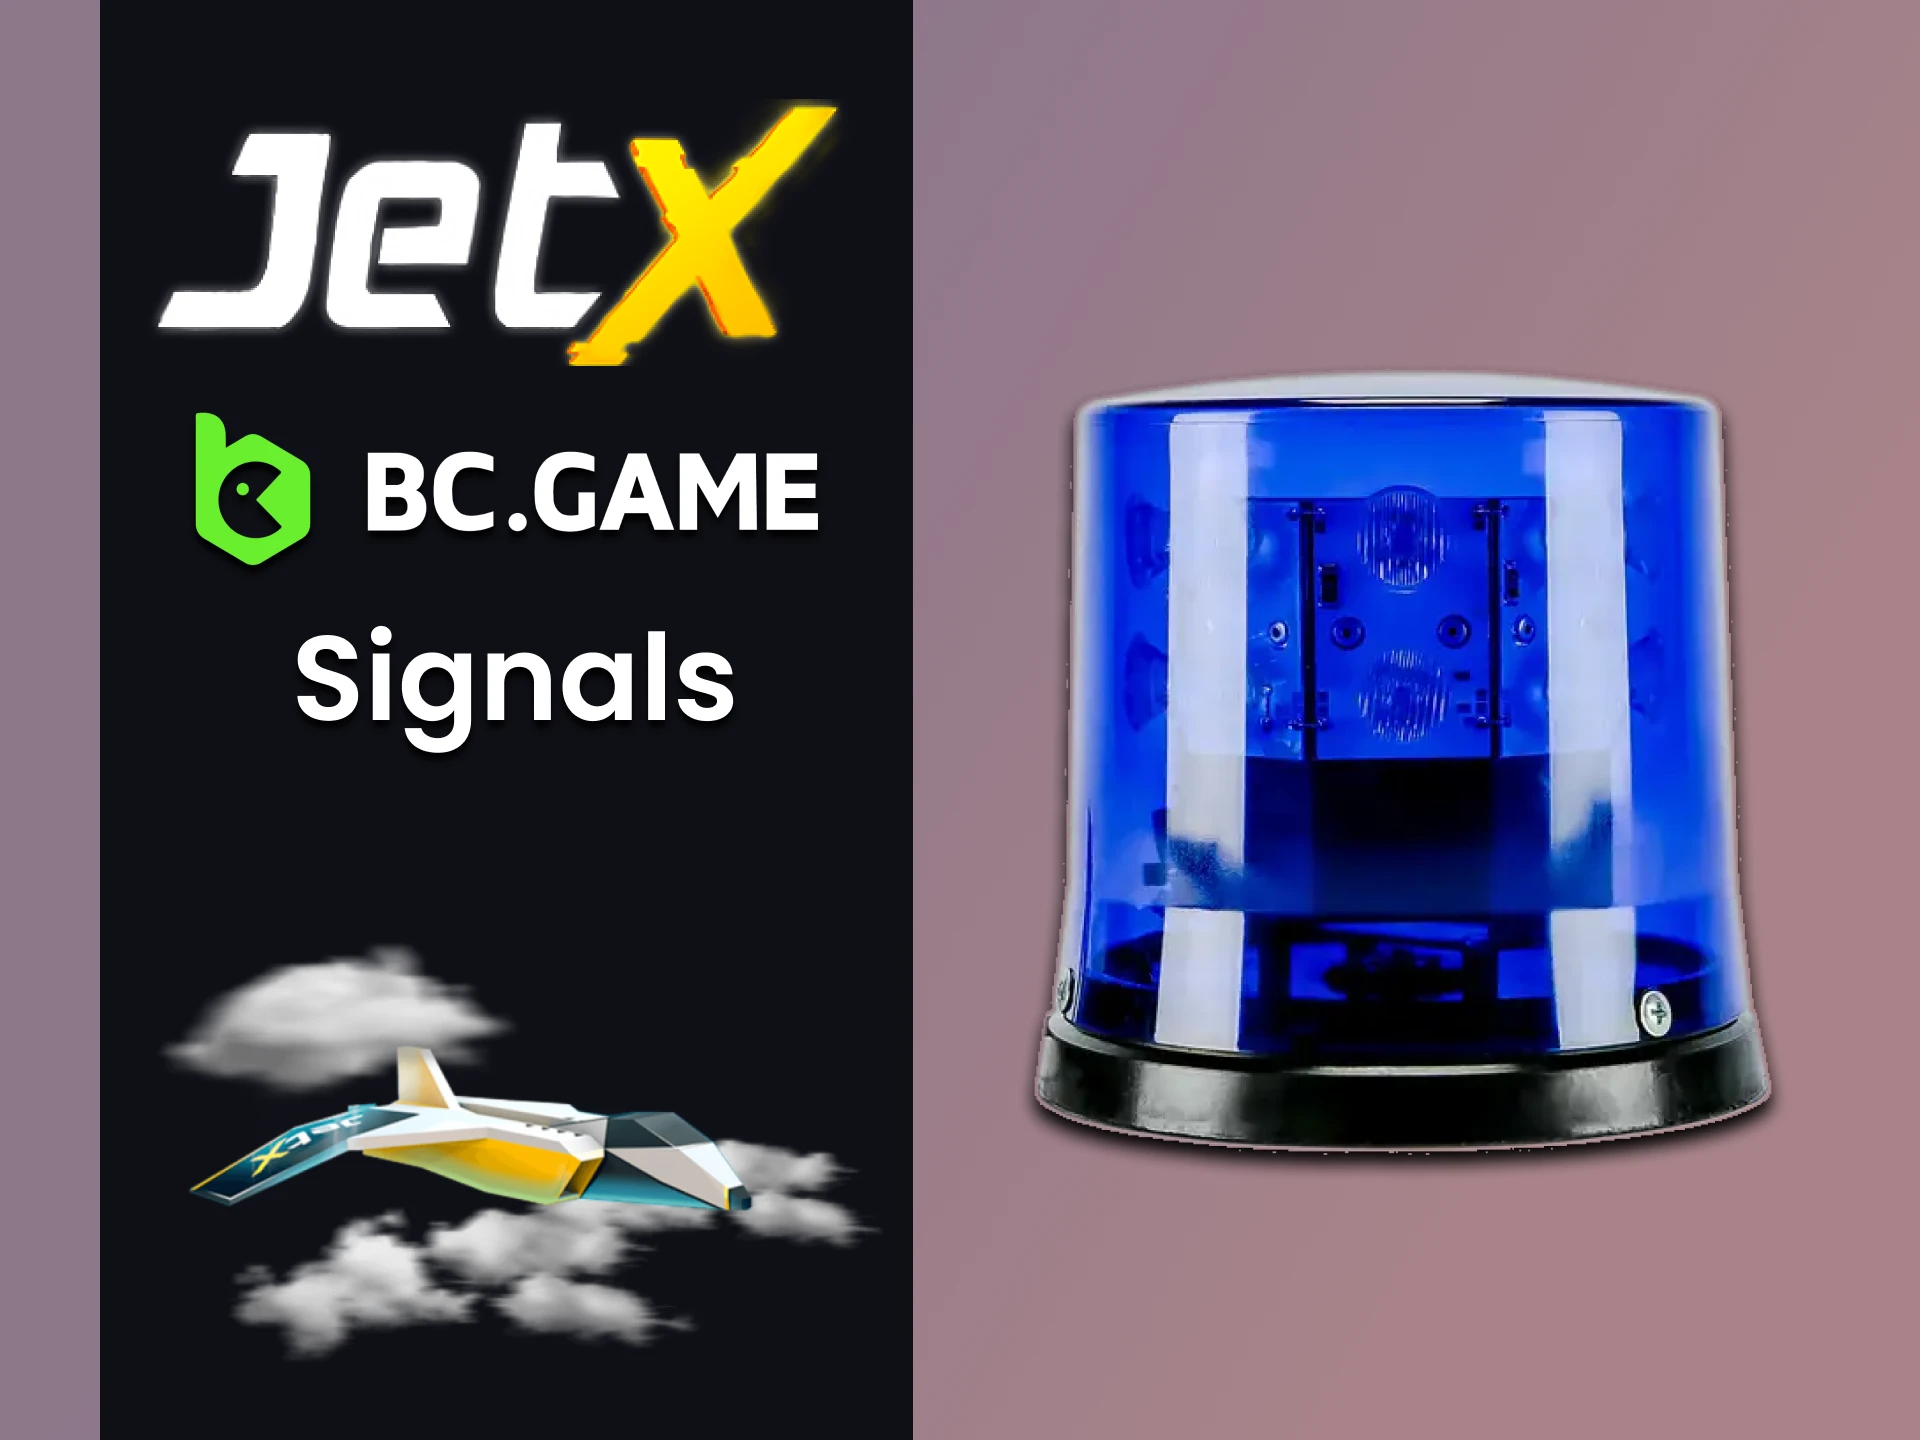 You can use signals for JetX from BC Game.